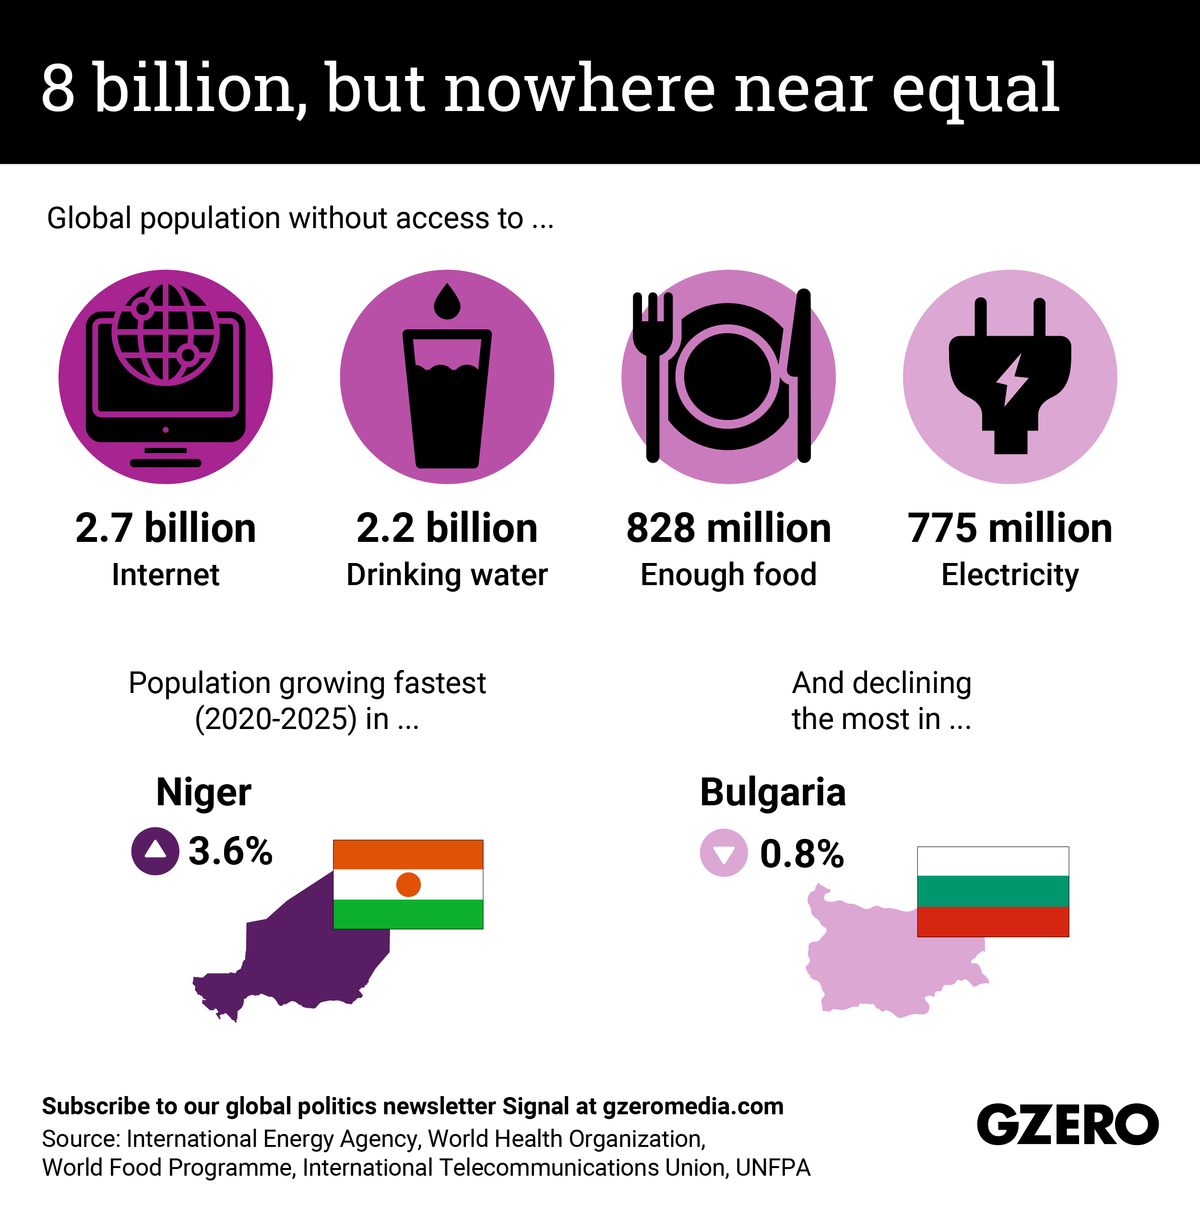 Infographic showing global lack of access to electricity, internet & water along with hunger below world's fastest-growing and most rapidly declining populations.